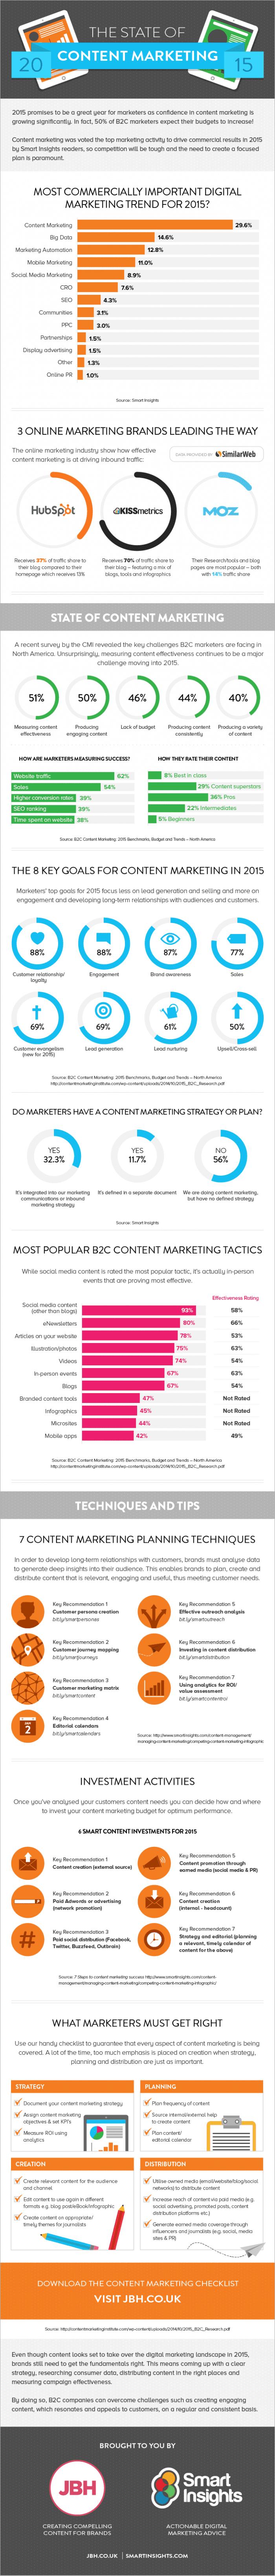 The State of Content Marketing 2015 